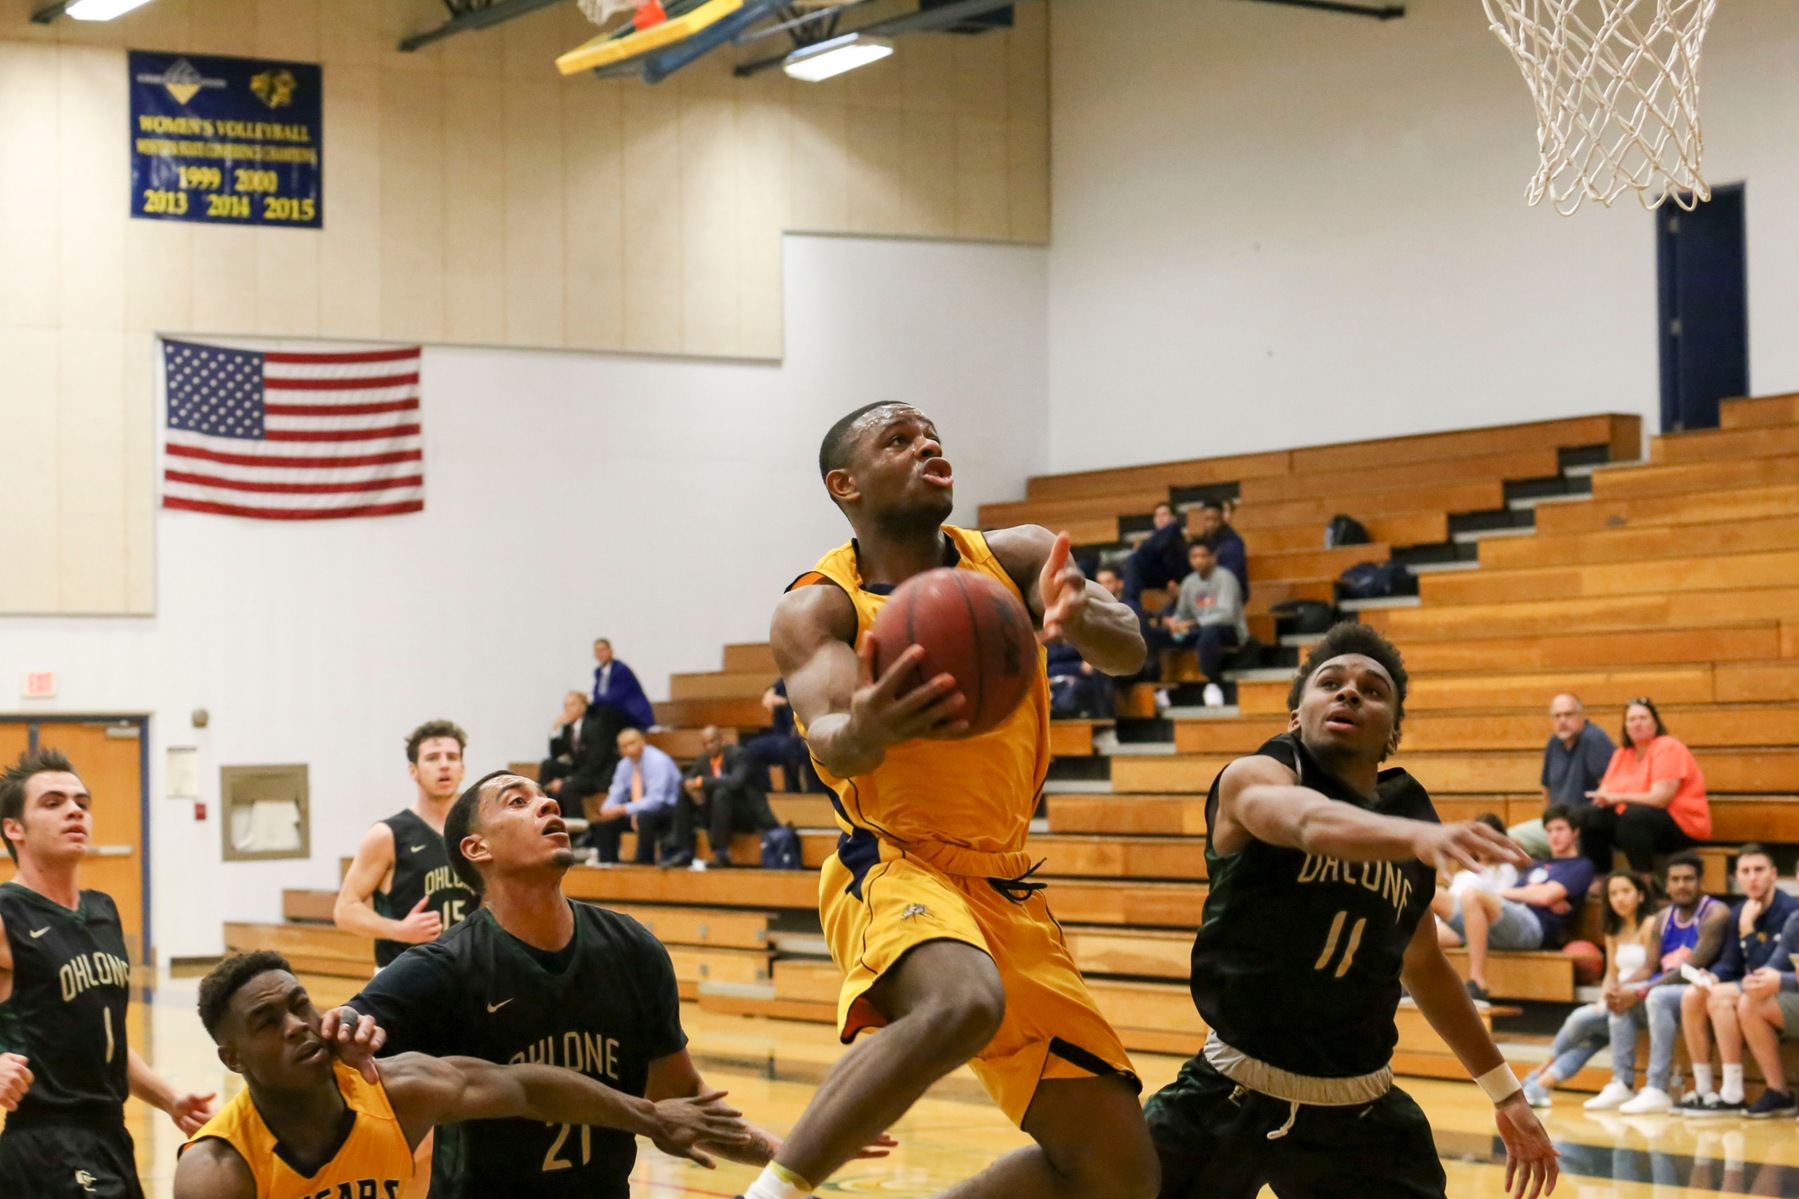 Cougars Close Out 'Holiday Classic' with 88-81 Loss to Ohlone